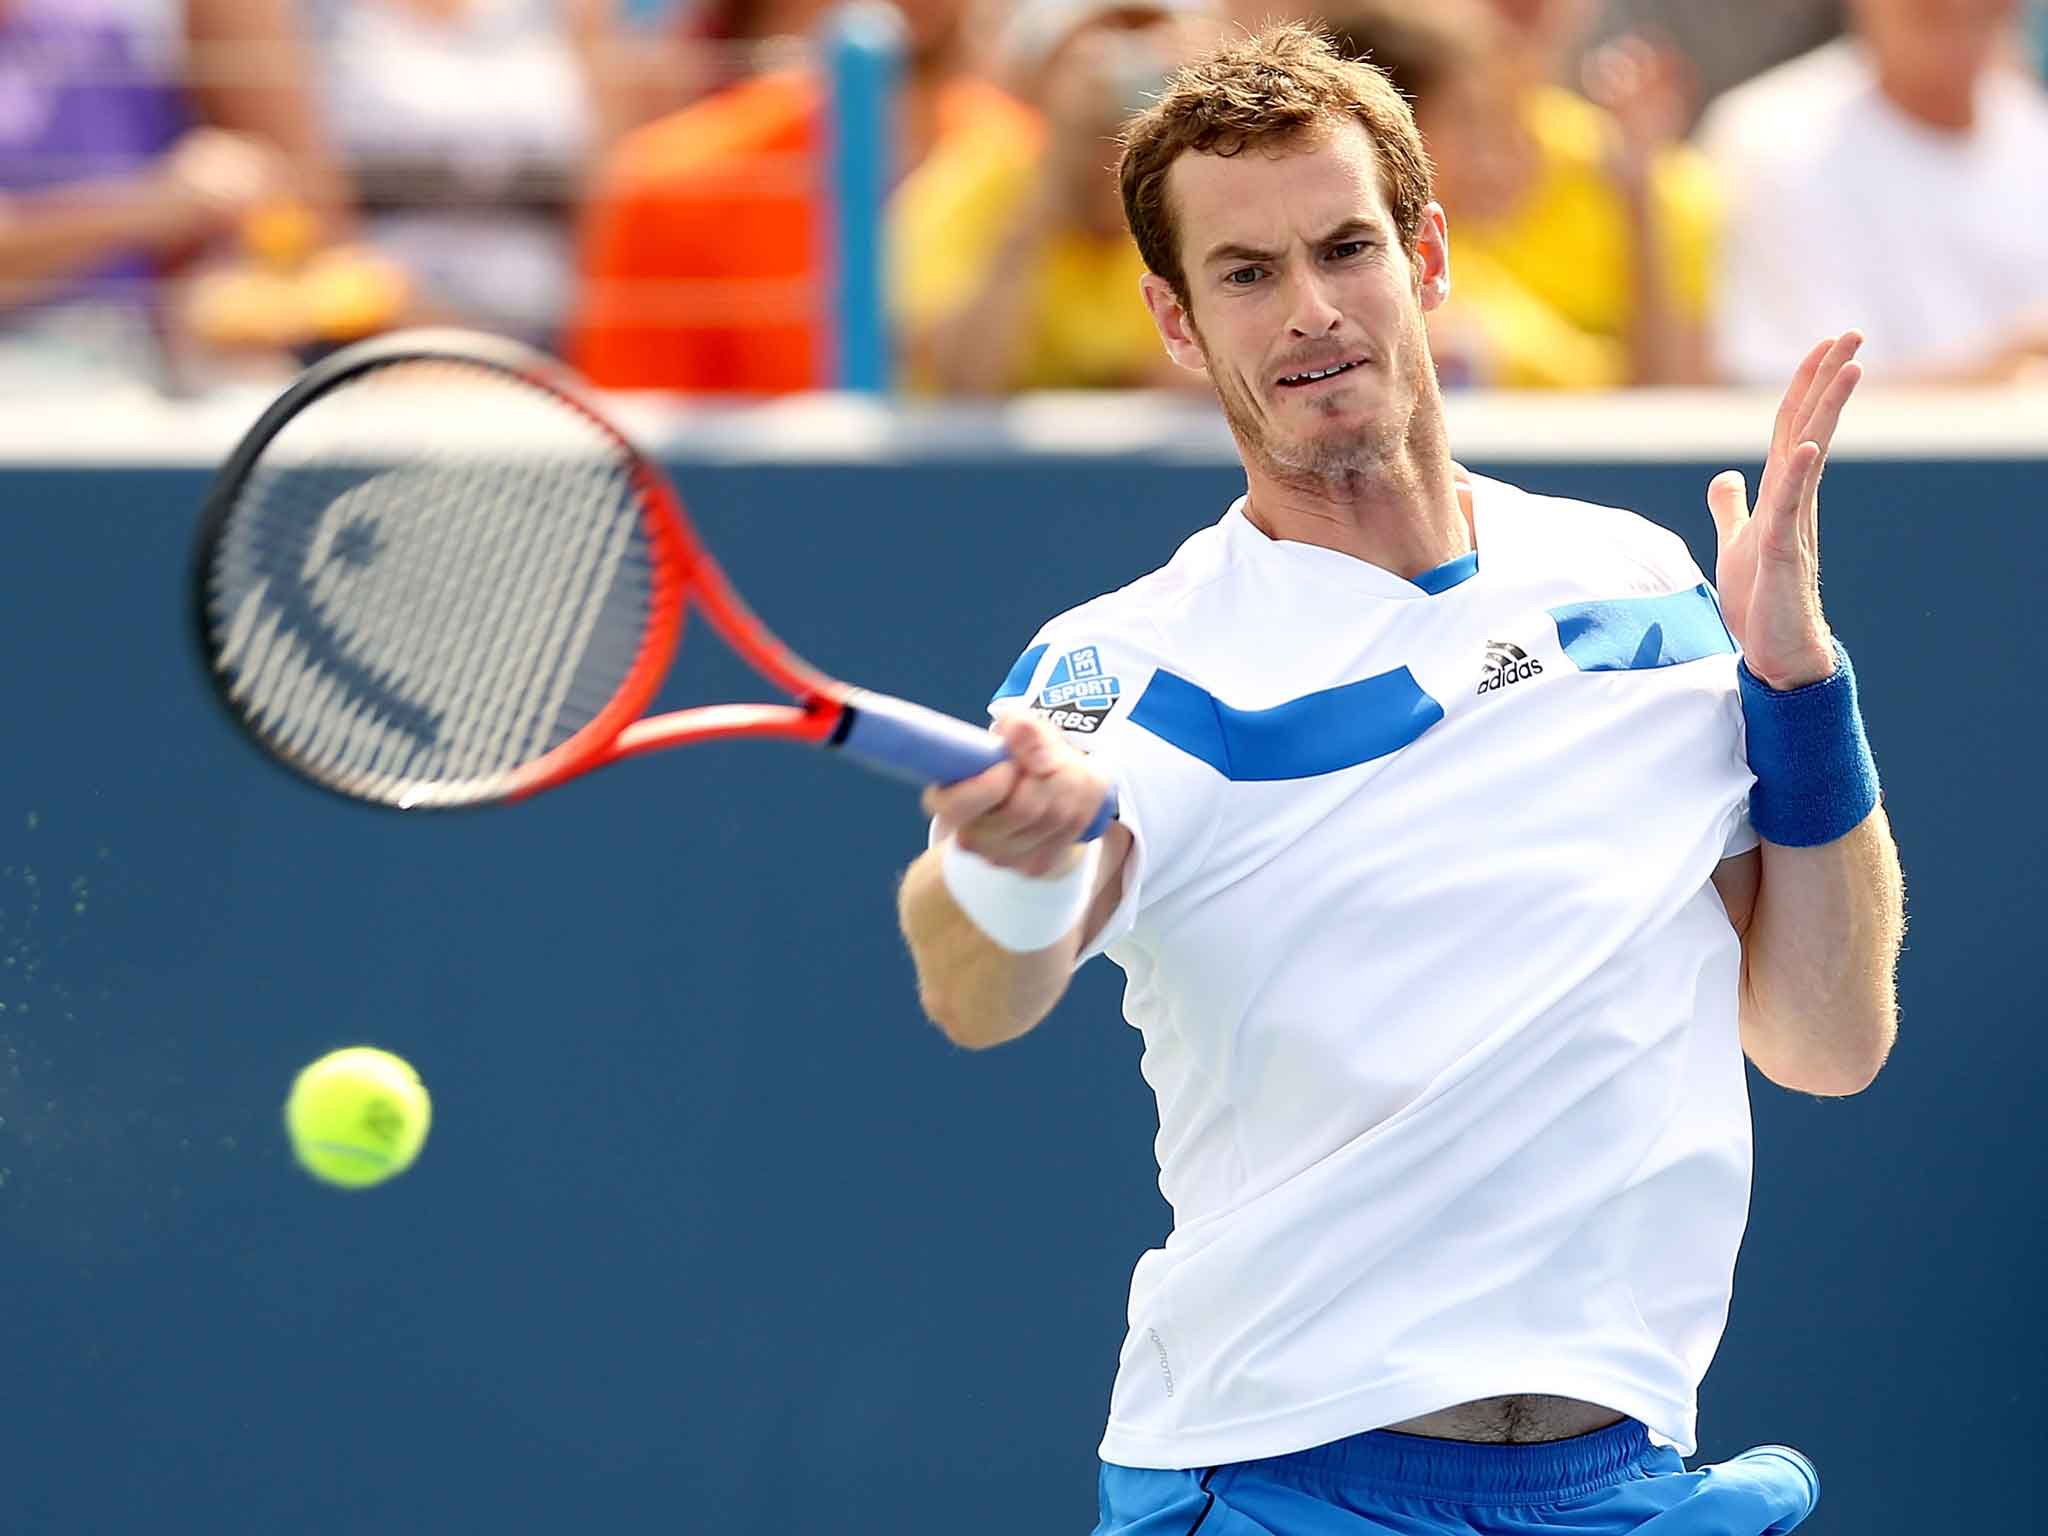 Murray defeated the 31-year-old Frenchman 6-2 6-2